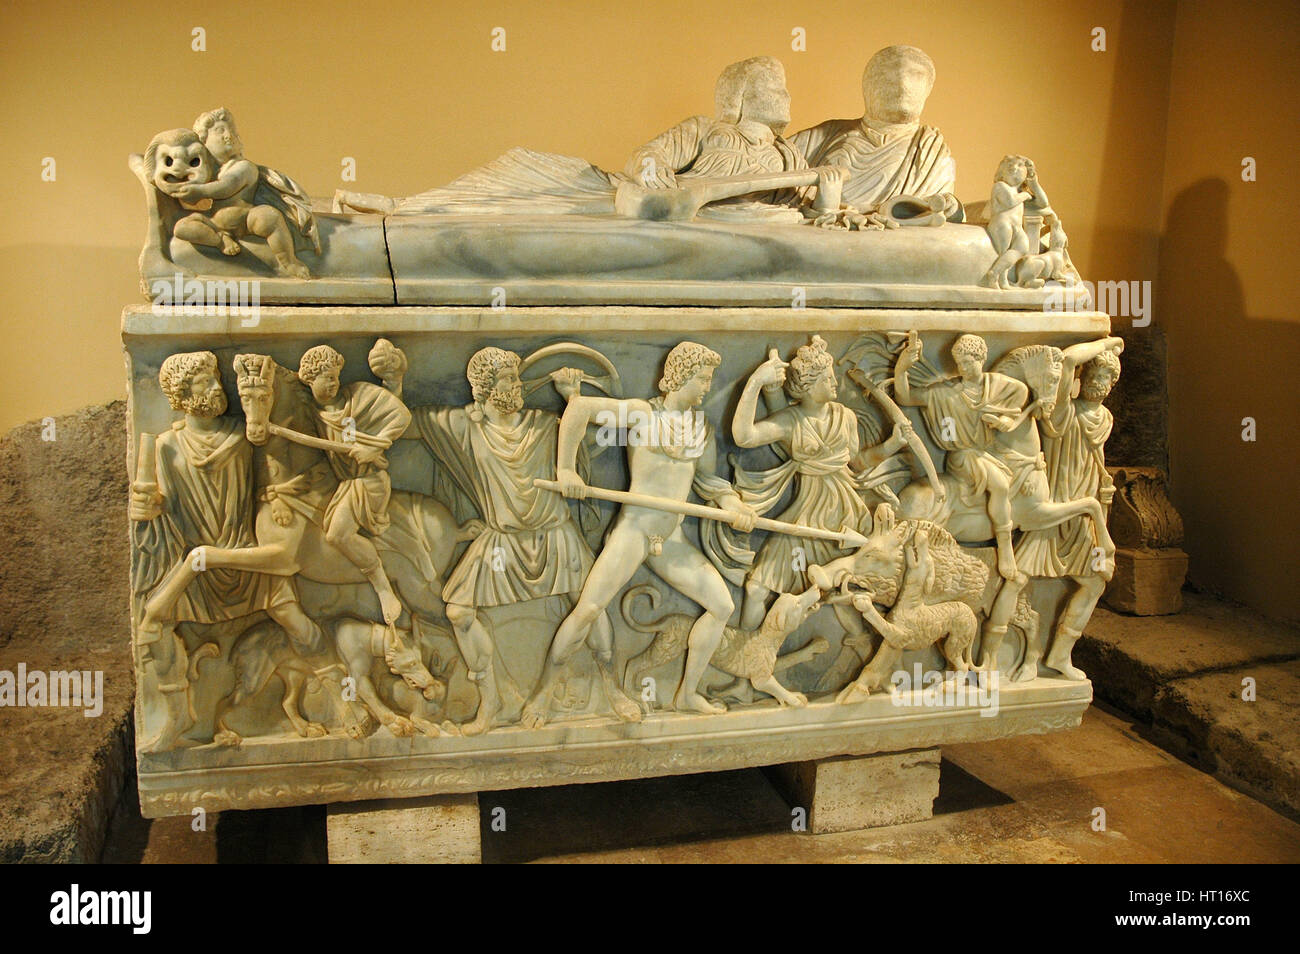 Roman sarcophagus with relief of the Calydonian Boar Hunt.  According to Greek mythology the Calydo Artist: Werner Forman. Stock Photo